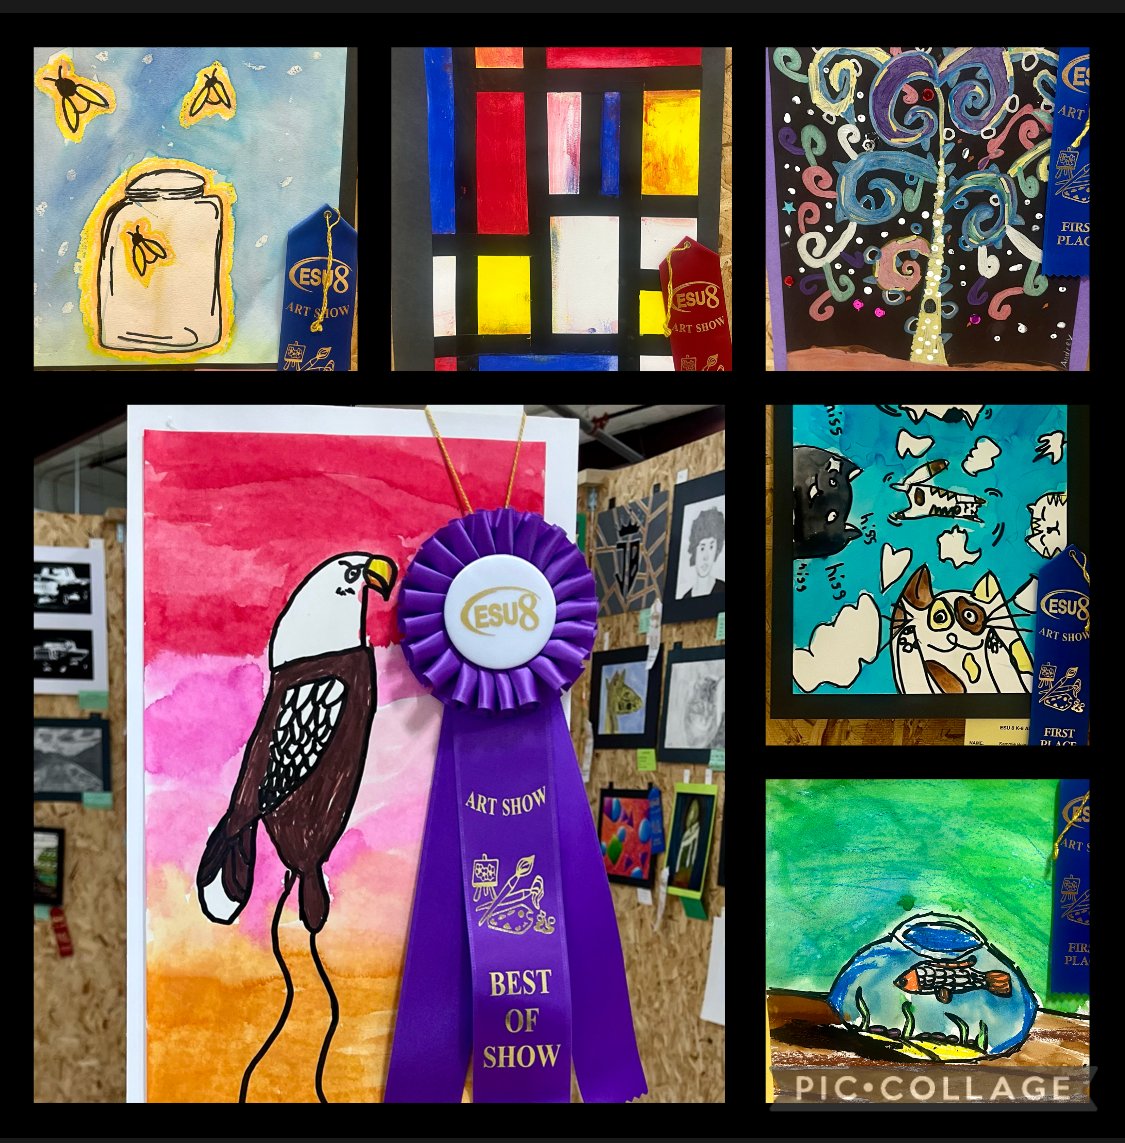 What a GREAT show! @esu8 Art Show is happening this weekend in Neligh, NE! I'm beyond proud of my @NorfolkCatholic Artist for their dedication throughout this school year!! A career first for me, BEST OF SHOW awarded to Aiden and his Eagle 🇺🇸 🦅🥇 #WeAreNC